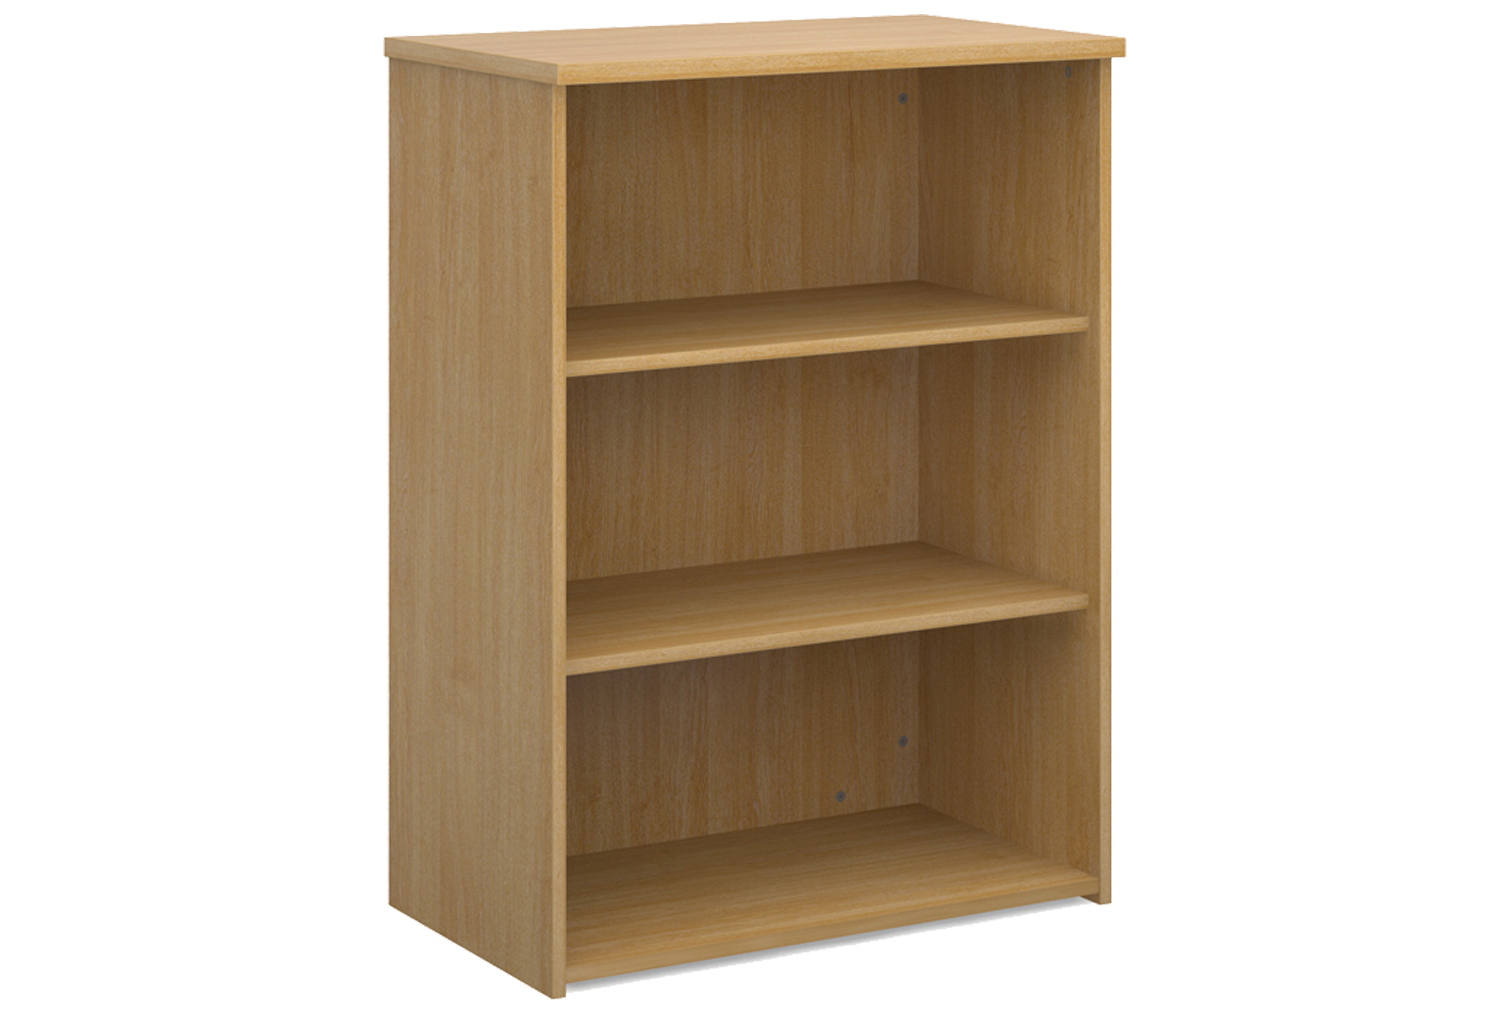 All Oak Office Bookcases, 2 Shelf - 80wx47dx109h (cm), Fully Installed